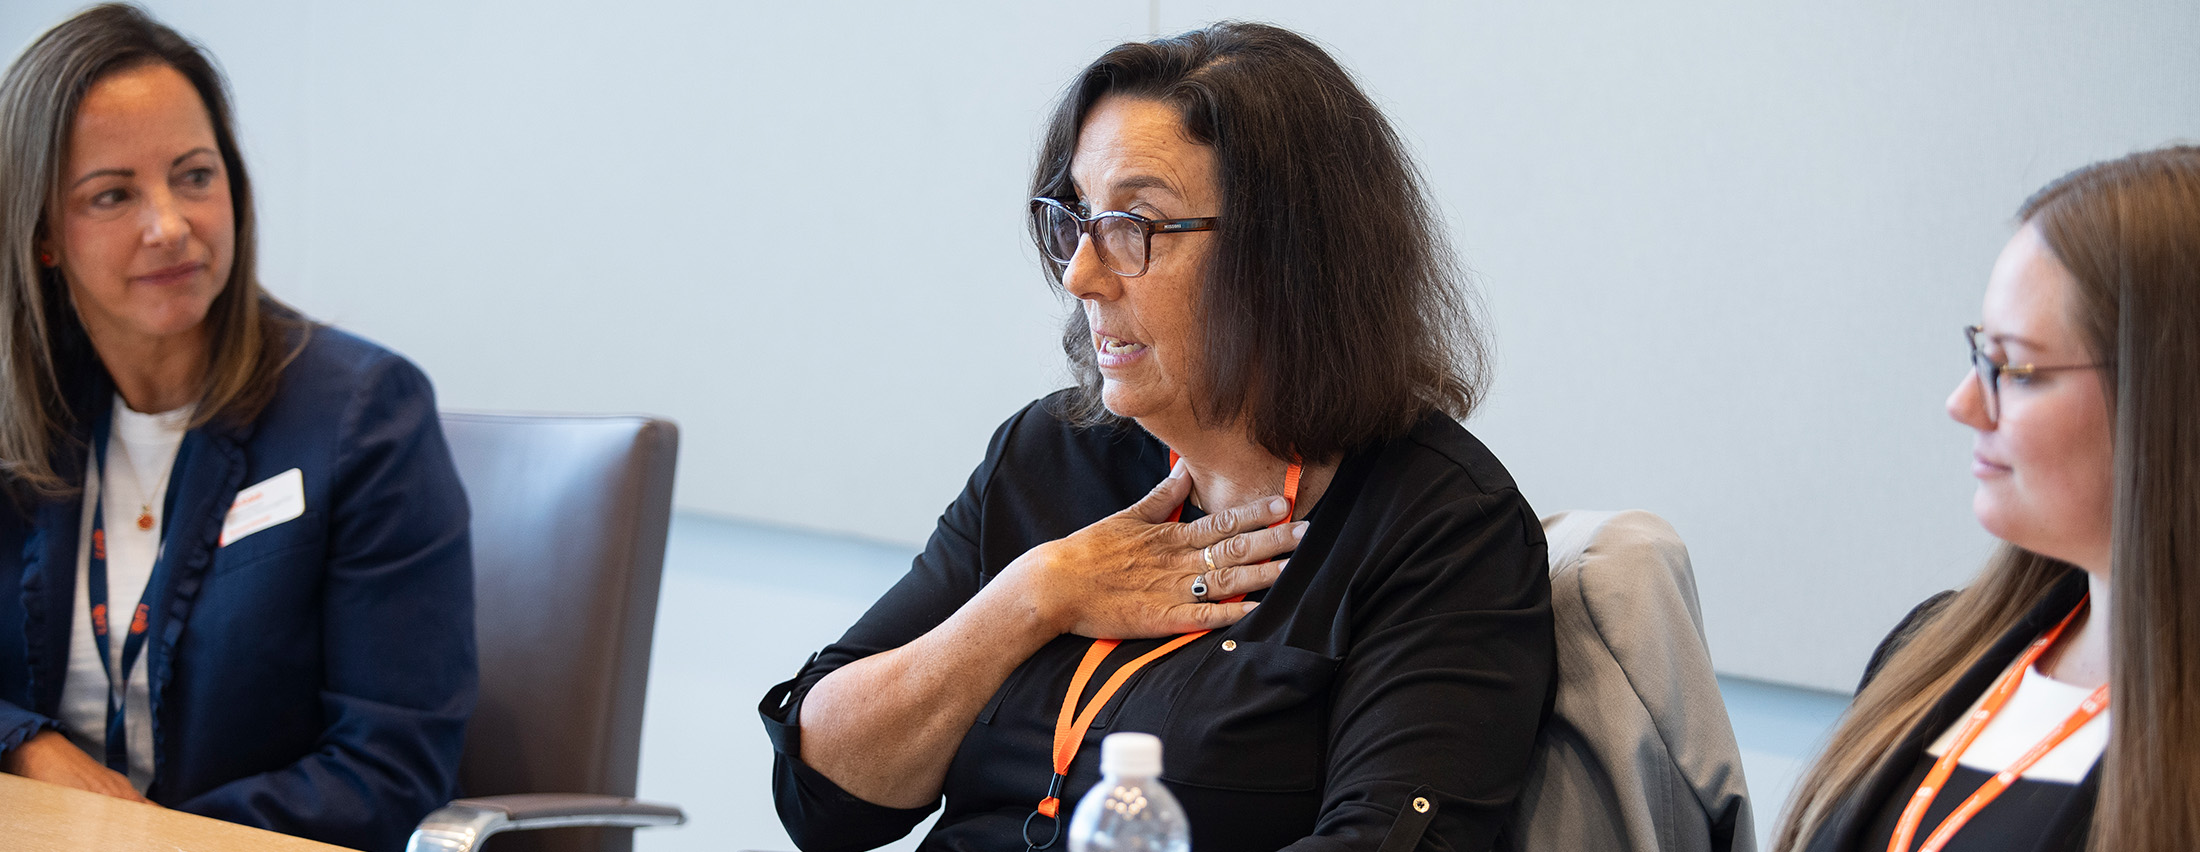 Judge Dancks speaking on a panel with two other women, talking with glasses on and her hand on her chest in a gesture while speaking